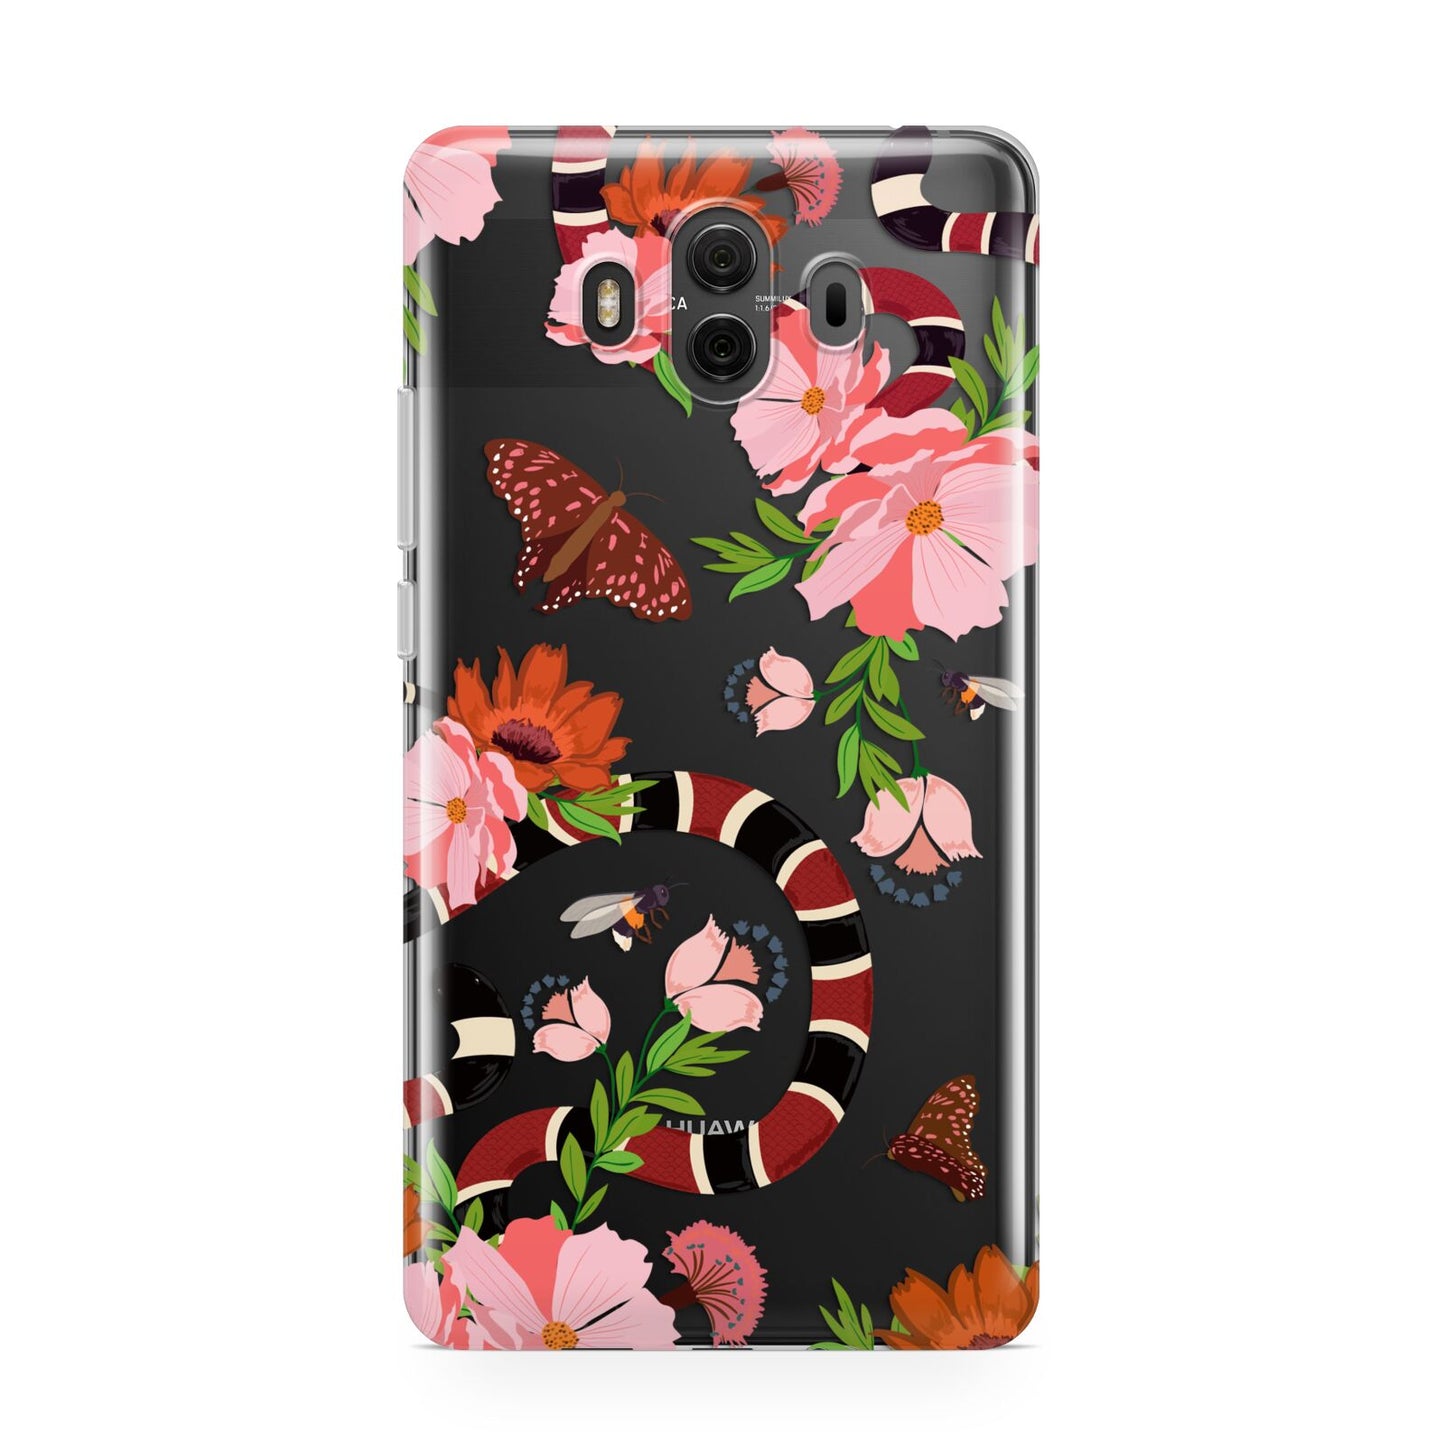 Floral Snake Huawei Mate 10 Protective Phone Case